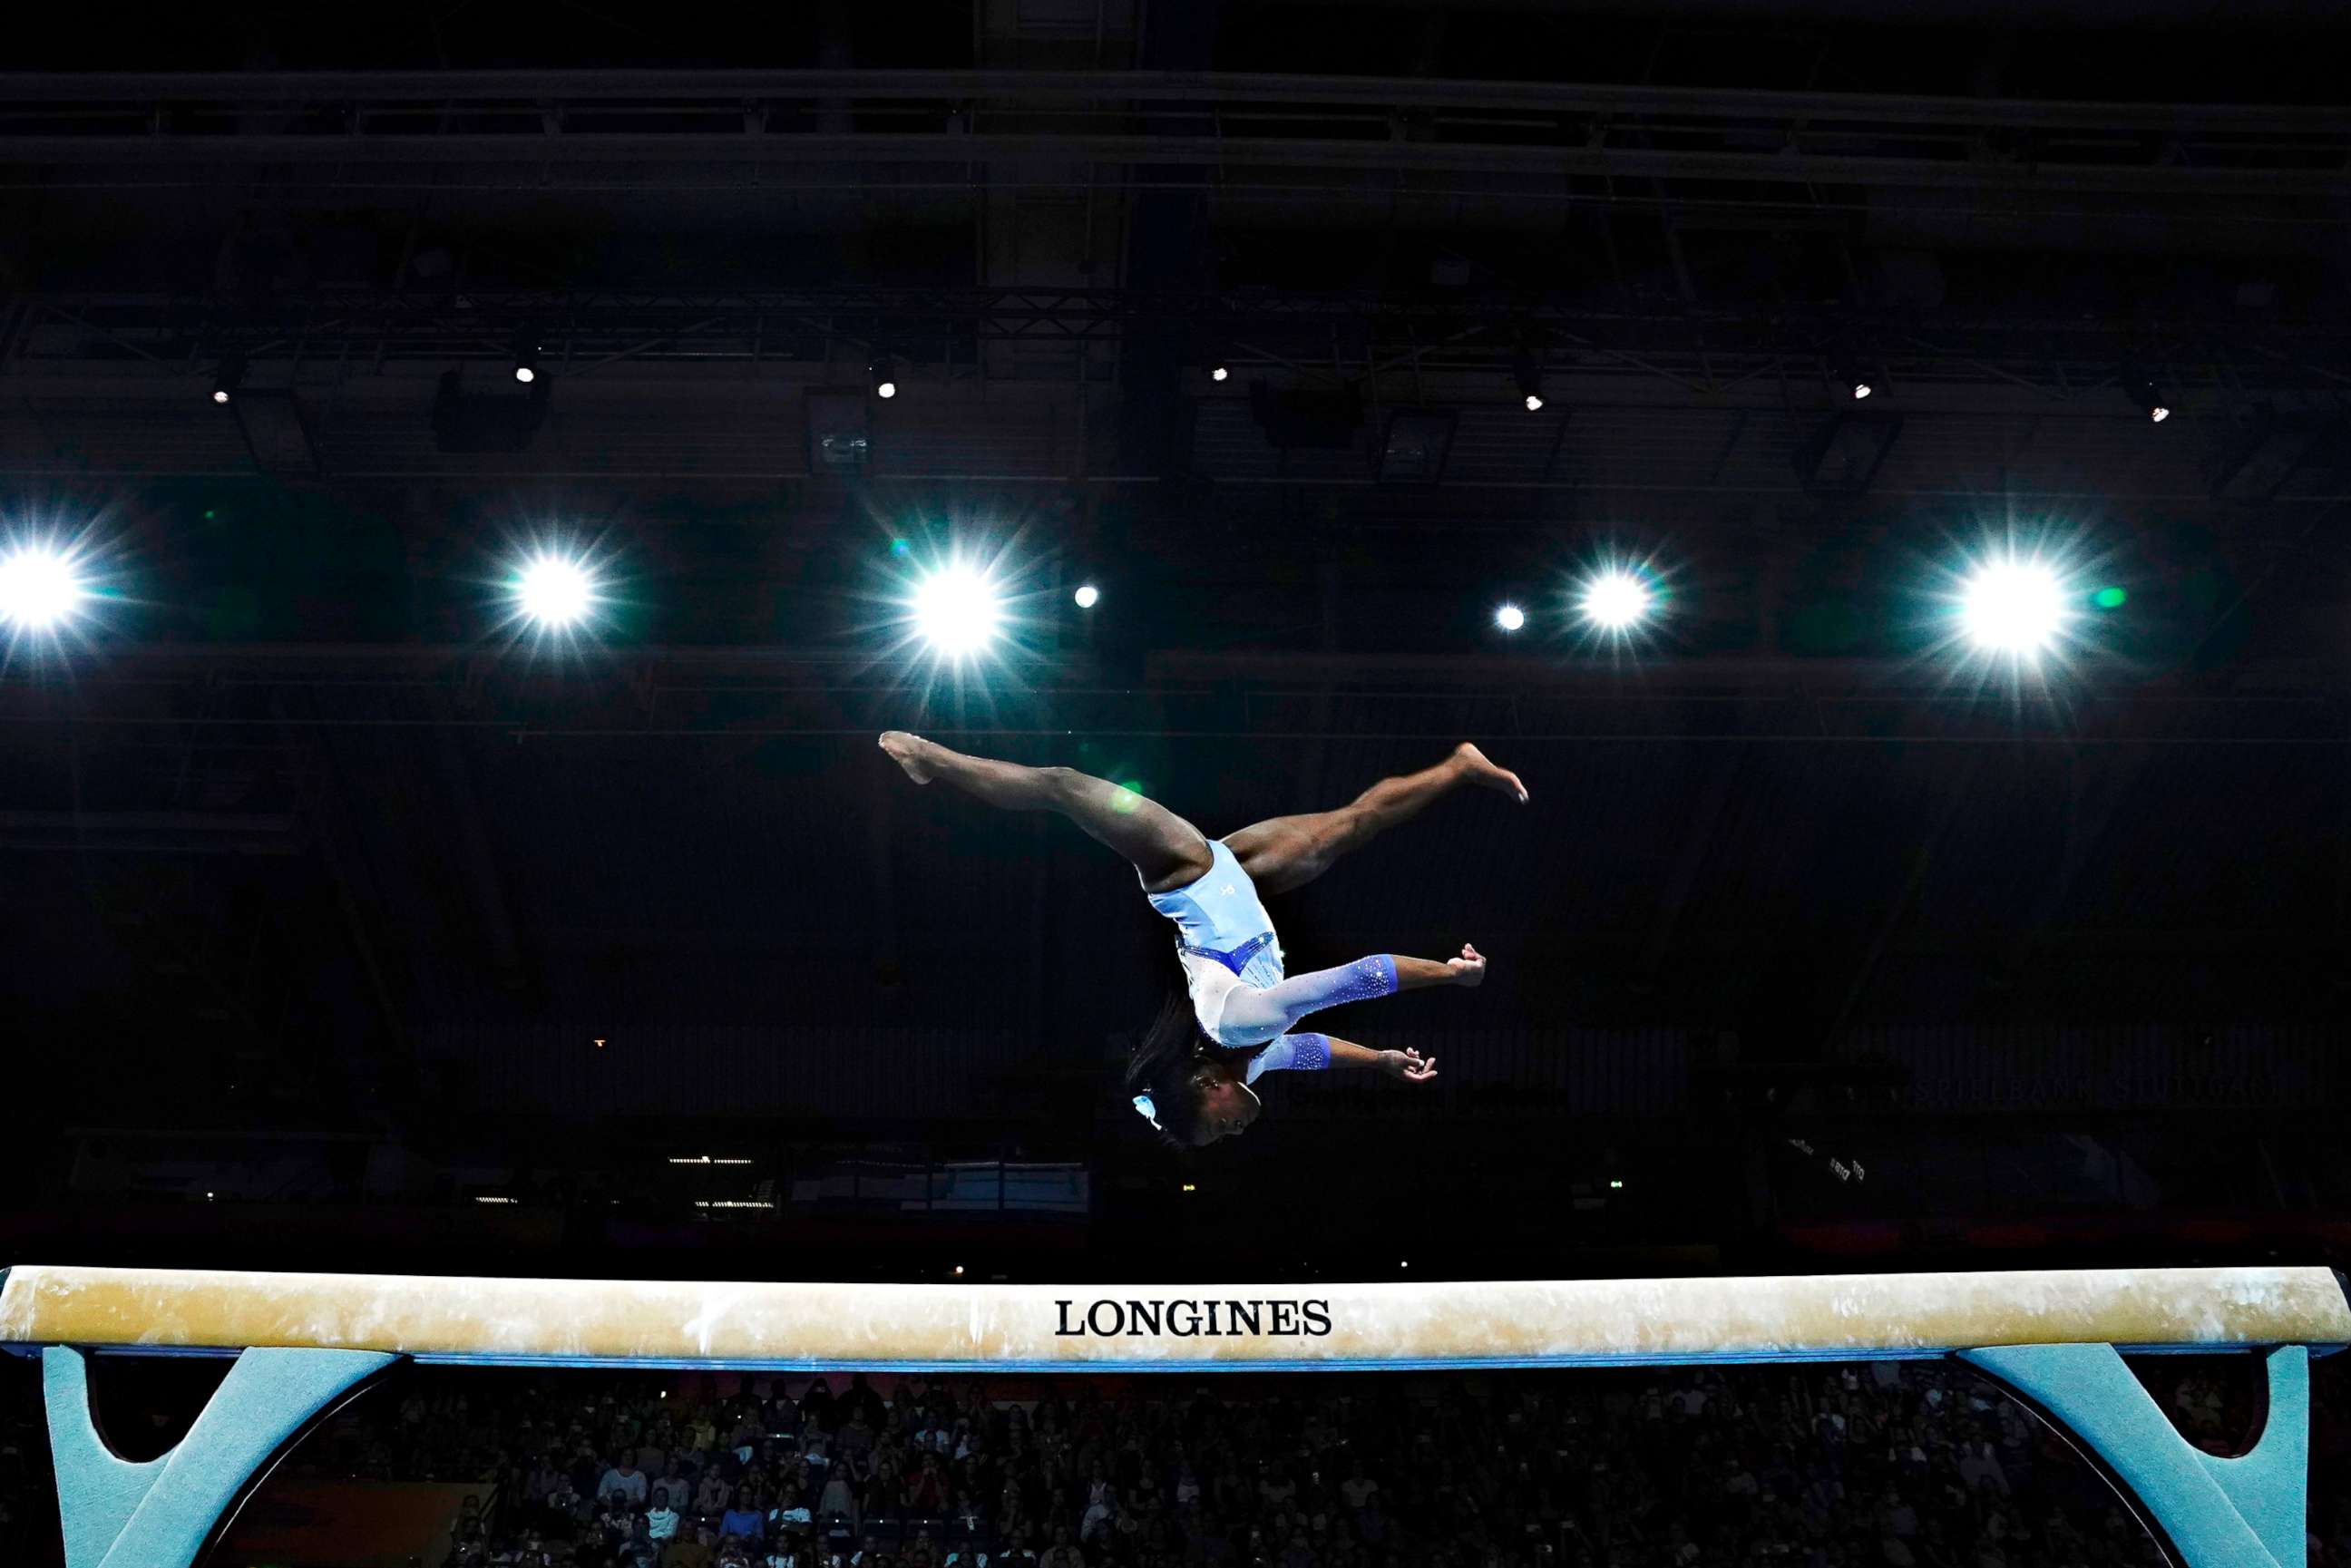 PHOTO: Simone Biles landed her signature double-double dismount from the beam at FIG Artistic Gymnastics World Championships at the Hanns-Martin-Schleyer-Halle in Stuttgart, Germany on Oct. 5, 2019, which was then named the "Biles."